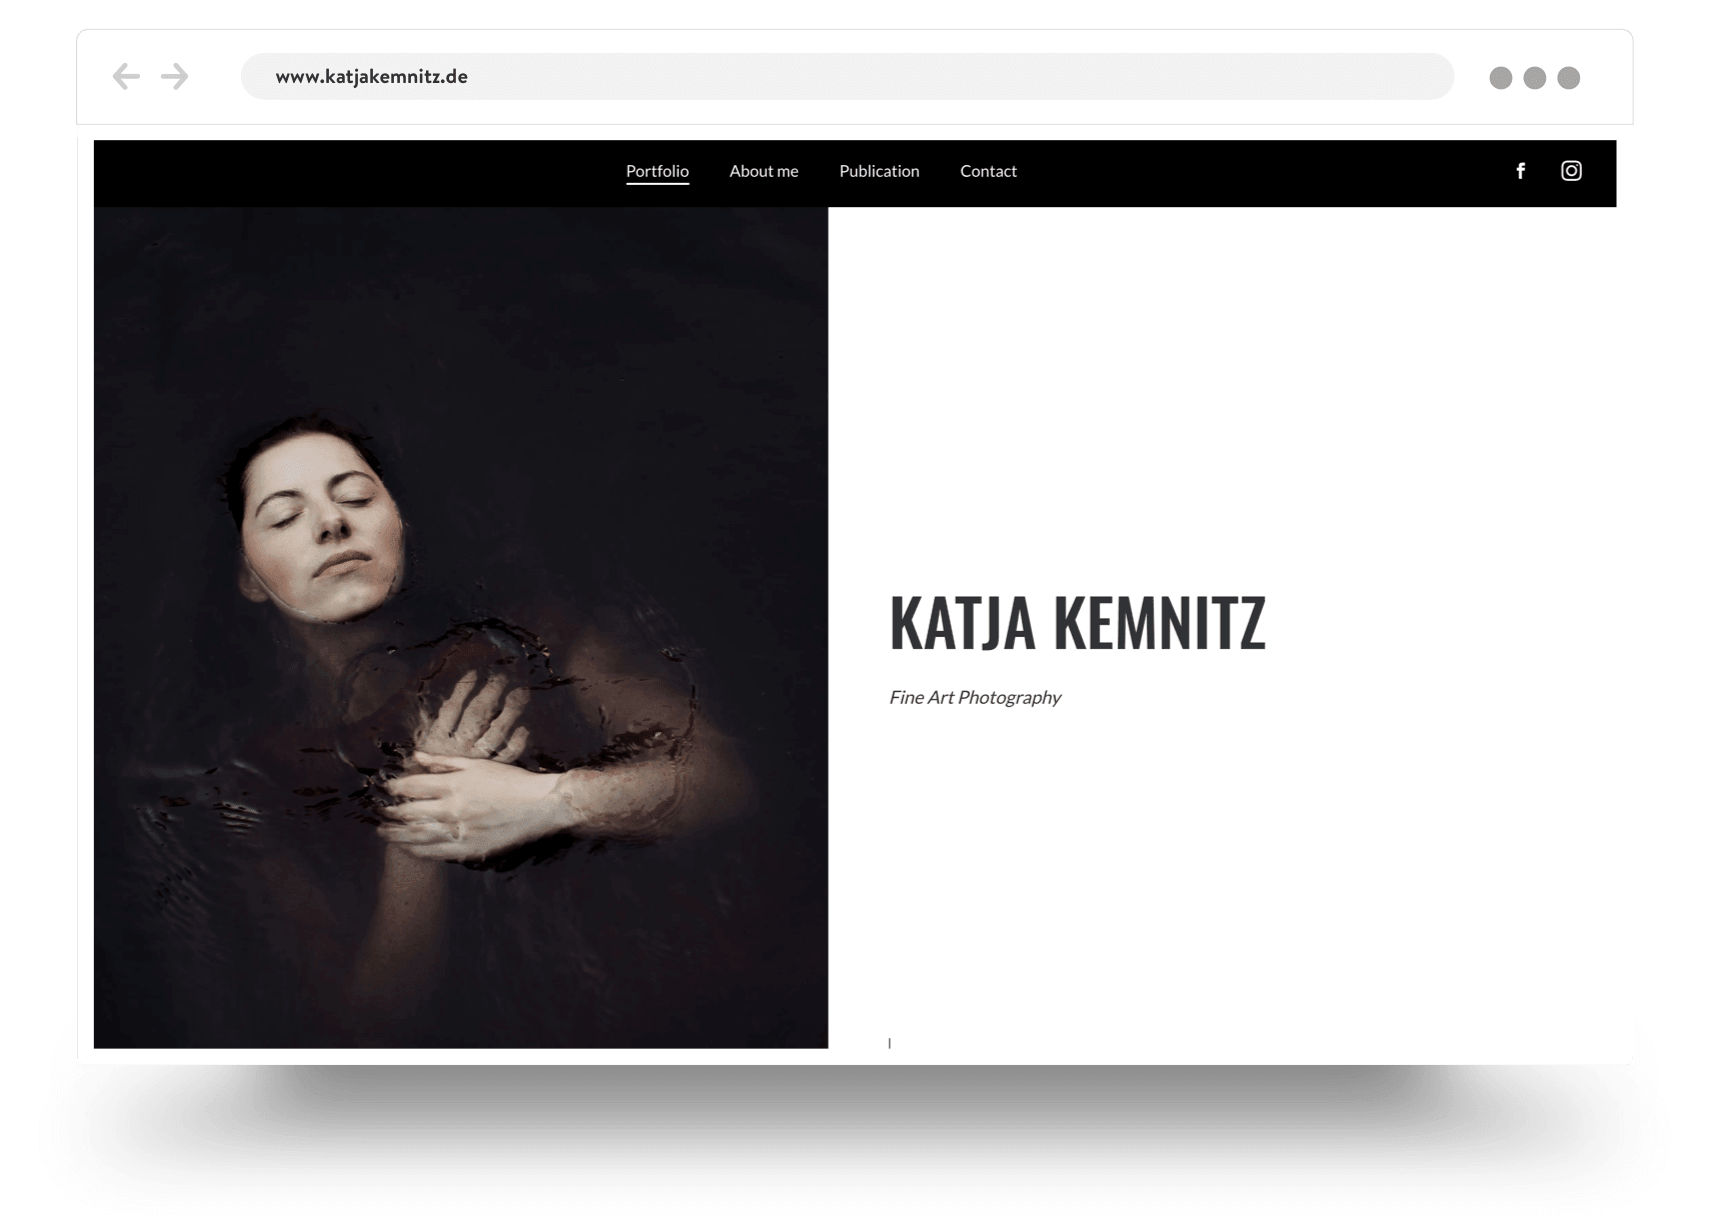 Example of a fine art photography portfolio website built with Jimdo showing an image of a woman partially submerged in water